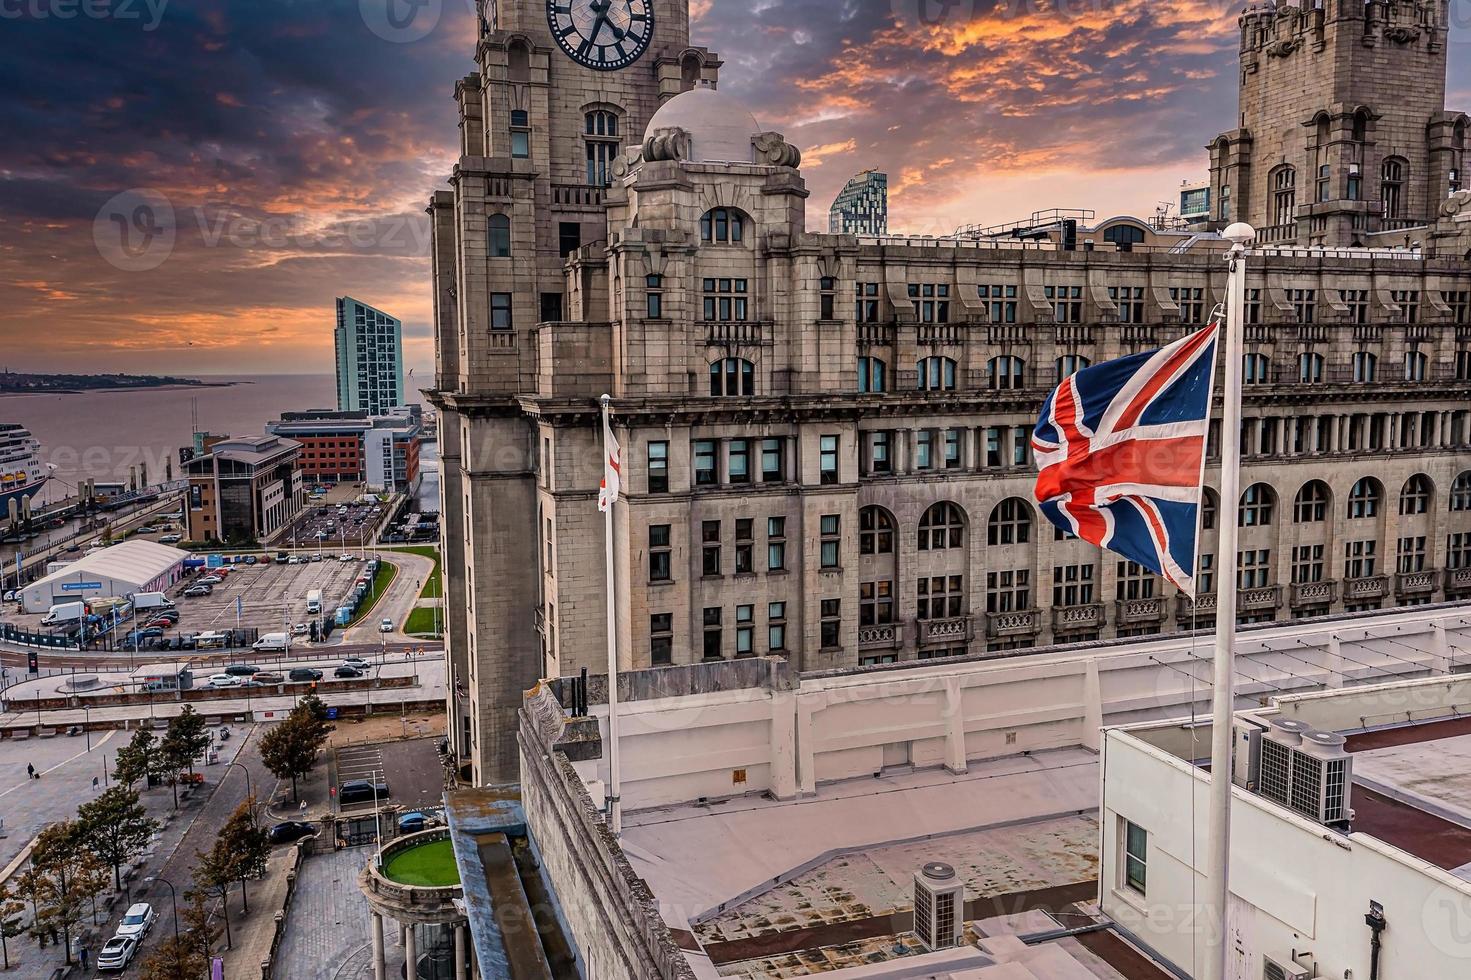 British UK flag on top of the building in Liverpool, UK. photo